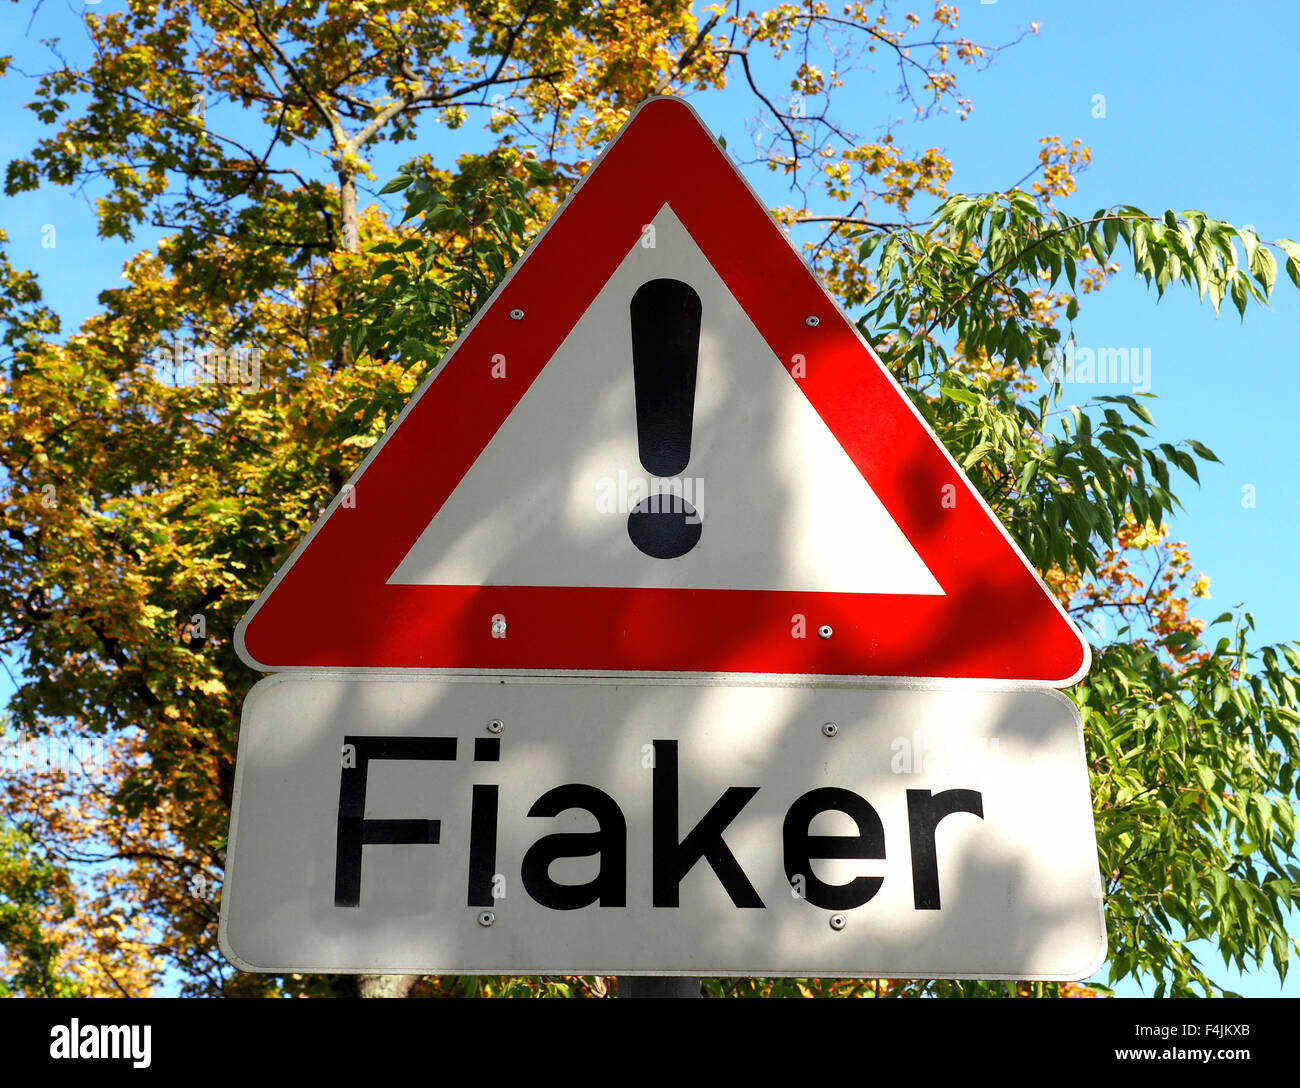 Fiaker sign, horse drawn carriages warning sign, Vienna, Austria. Stock Photo